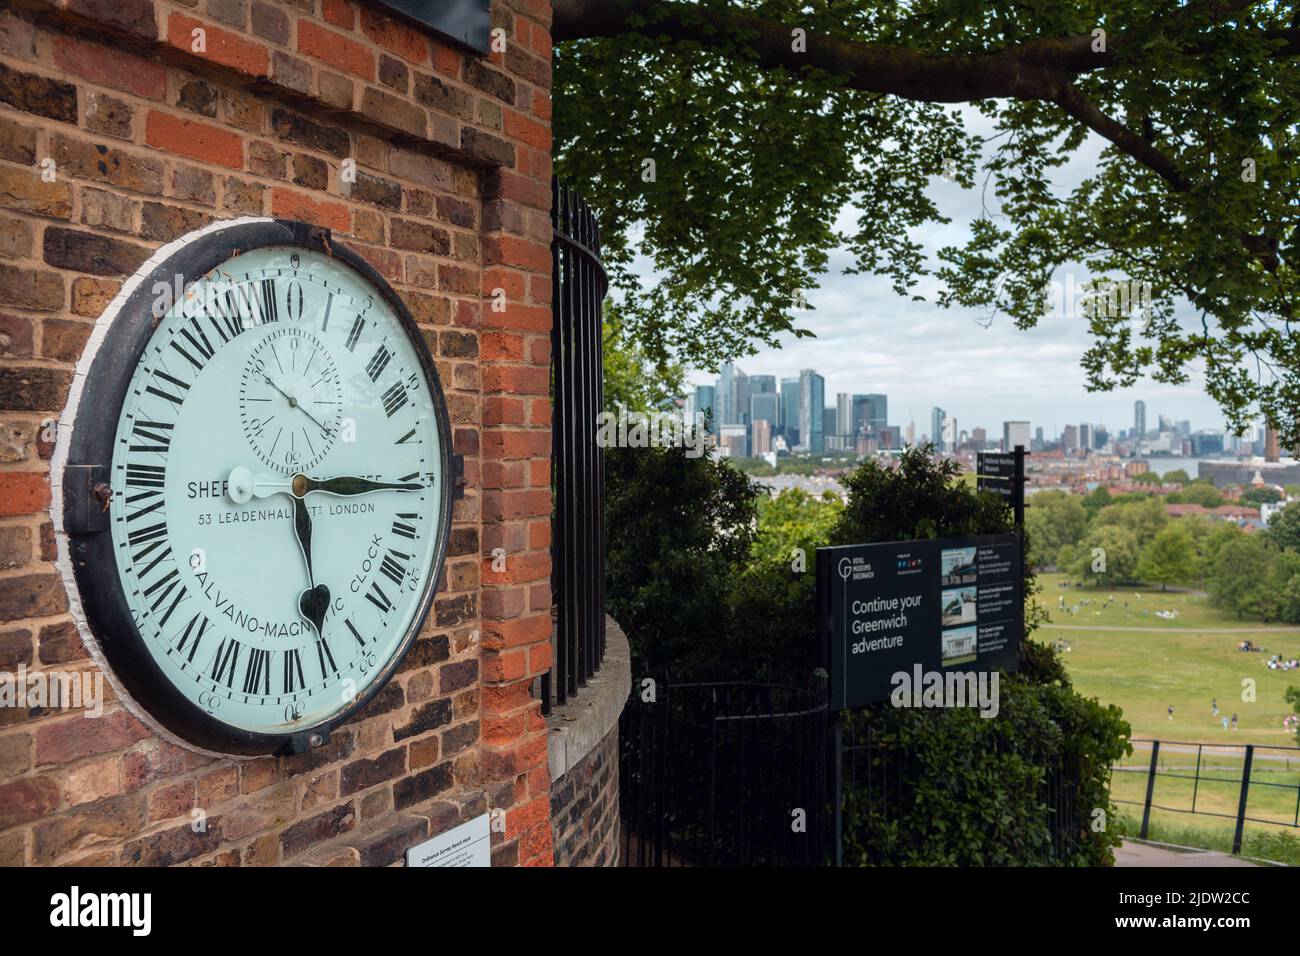 London, UK - May 13, 2022: The 24 hour Shepherd Clock at the Royal Observatory in Greenwich, London, England Stock Photo